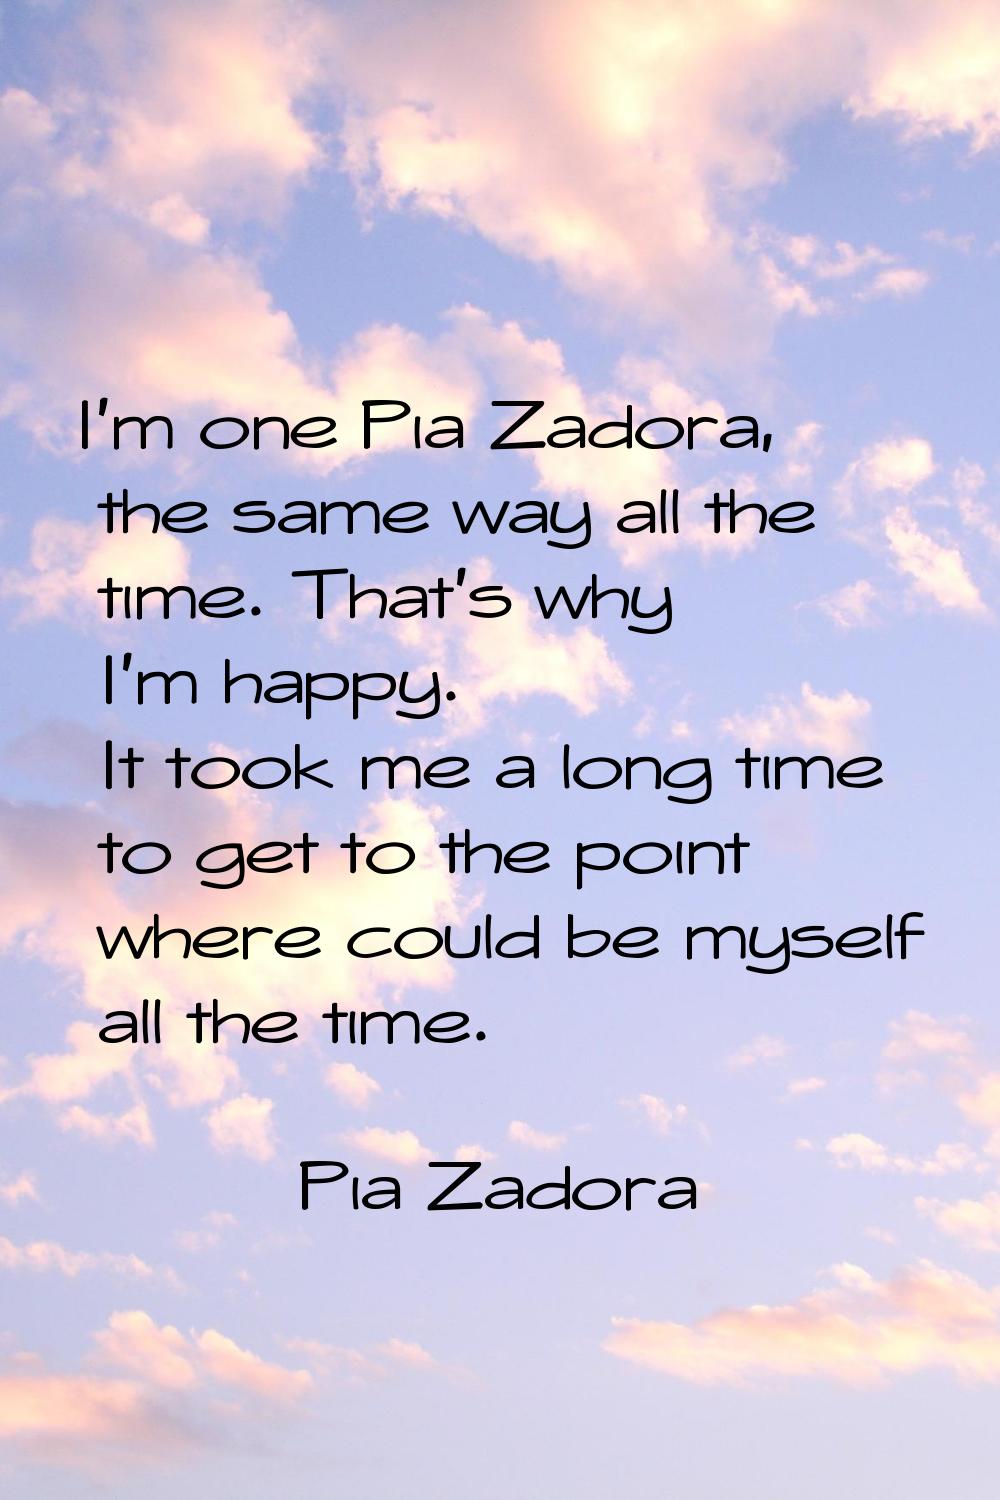 I'm one Pia Zadora, the same way all the time. That's why I'm happy. It took me a long time to get 